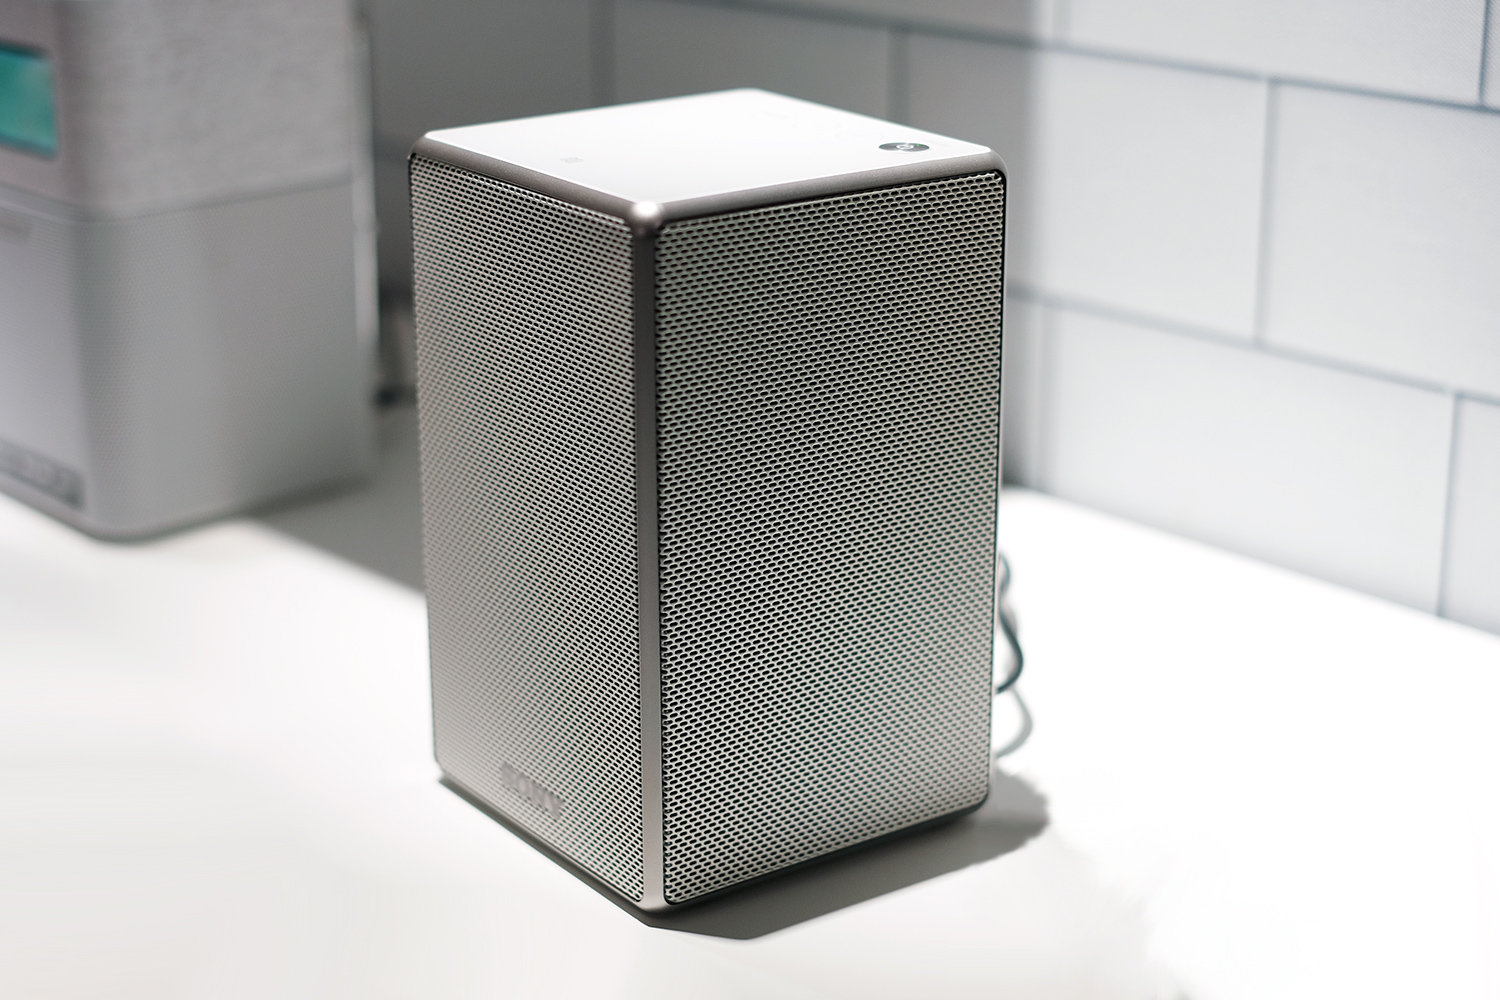 Sony's new multi-room speakers want to knock Sonos its perch | Ars Technica